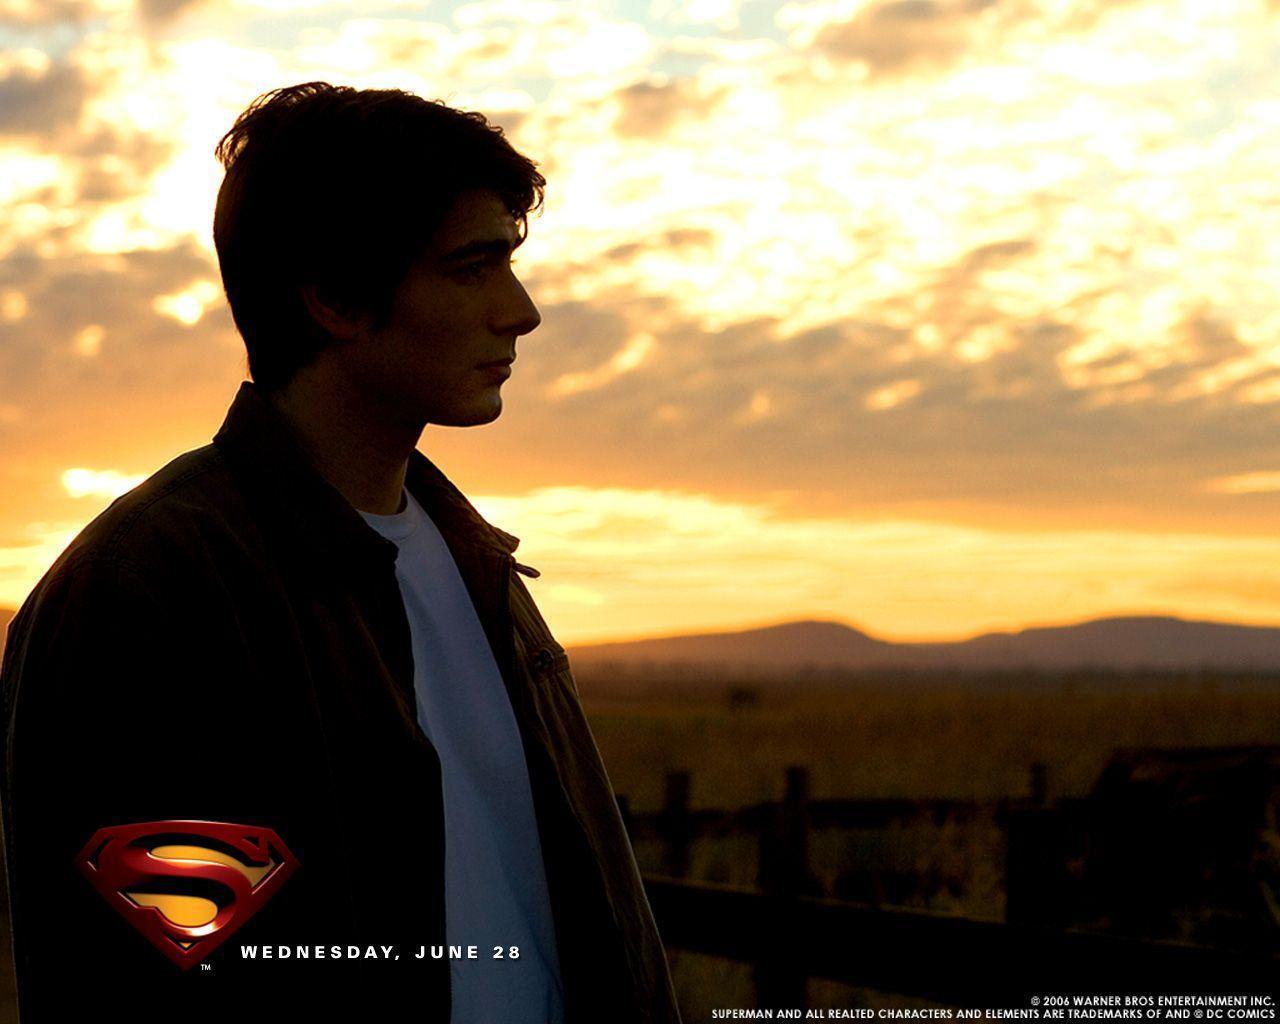 Brandon Routh Routh in Superman Returns Wallpaper 2 800x600